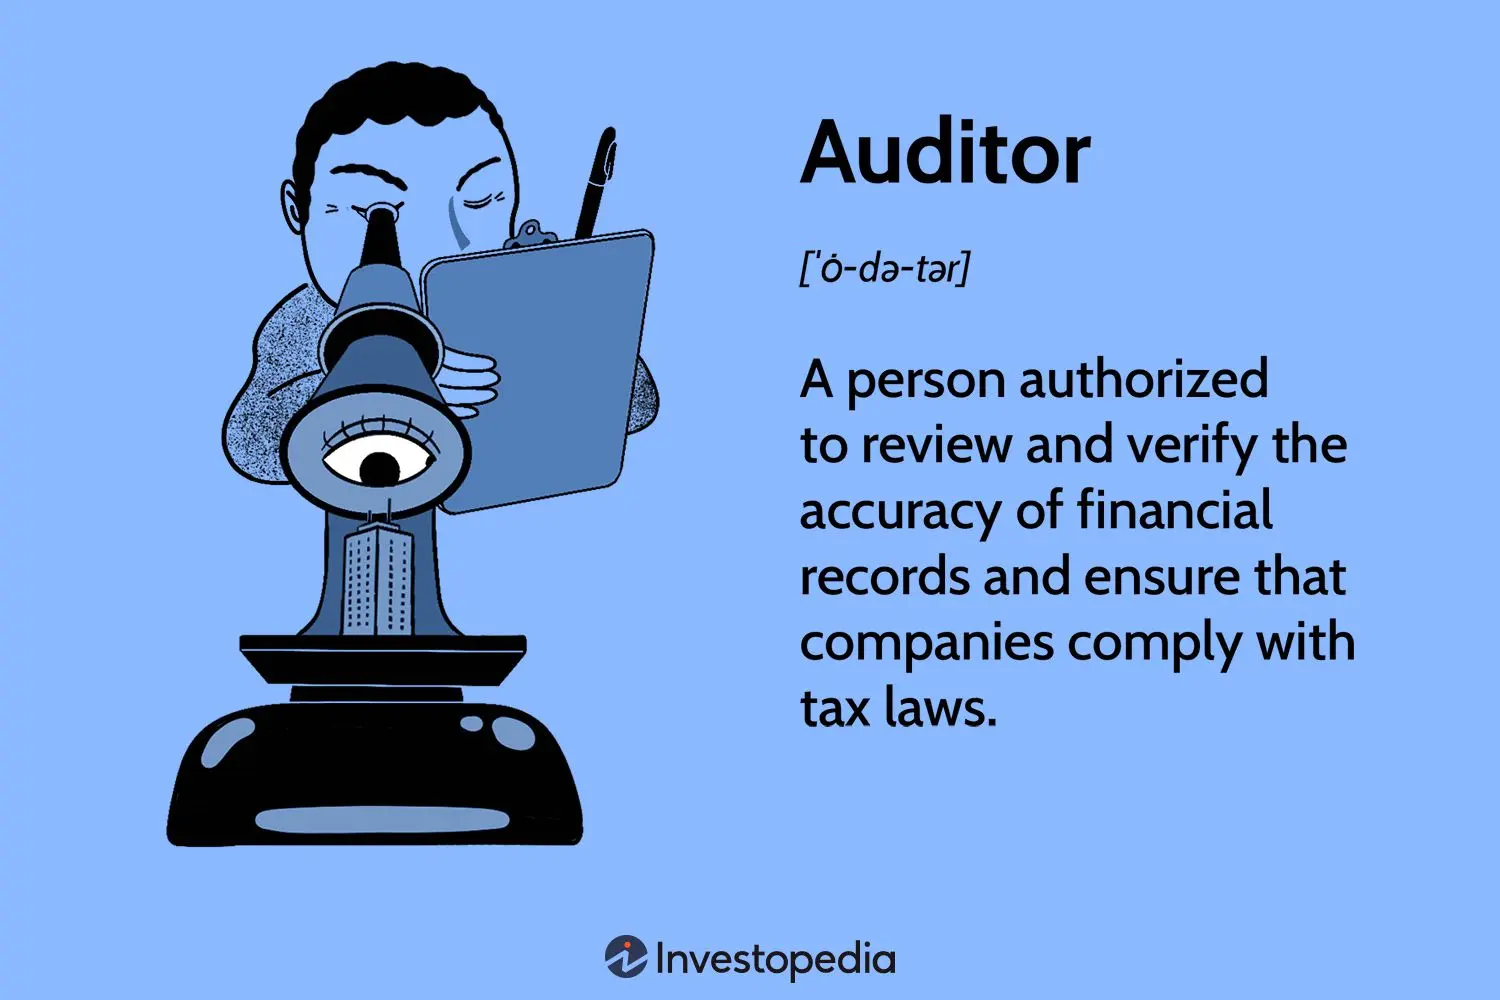 government certified auditor - Who conducts government audits